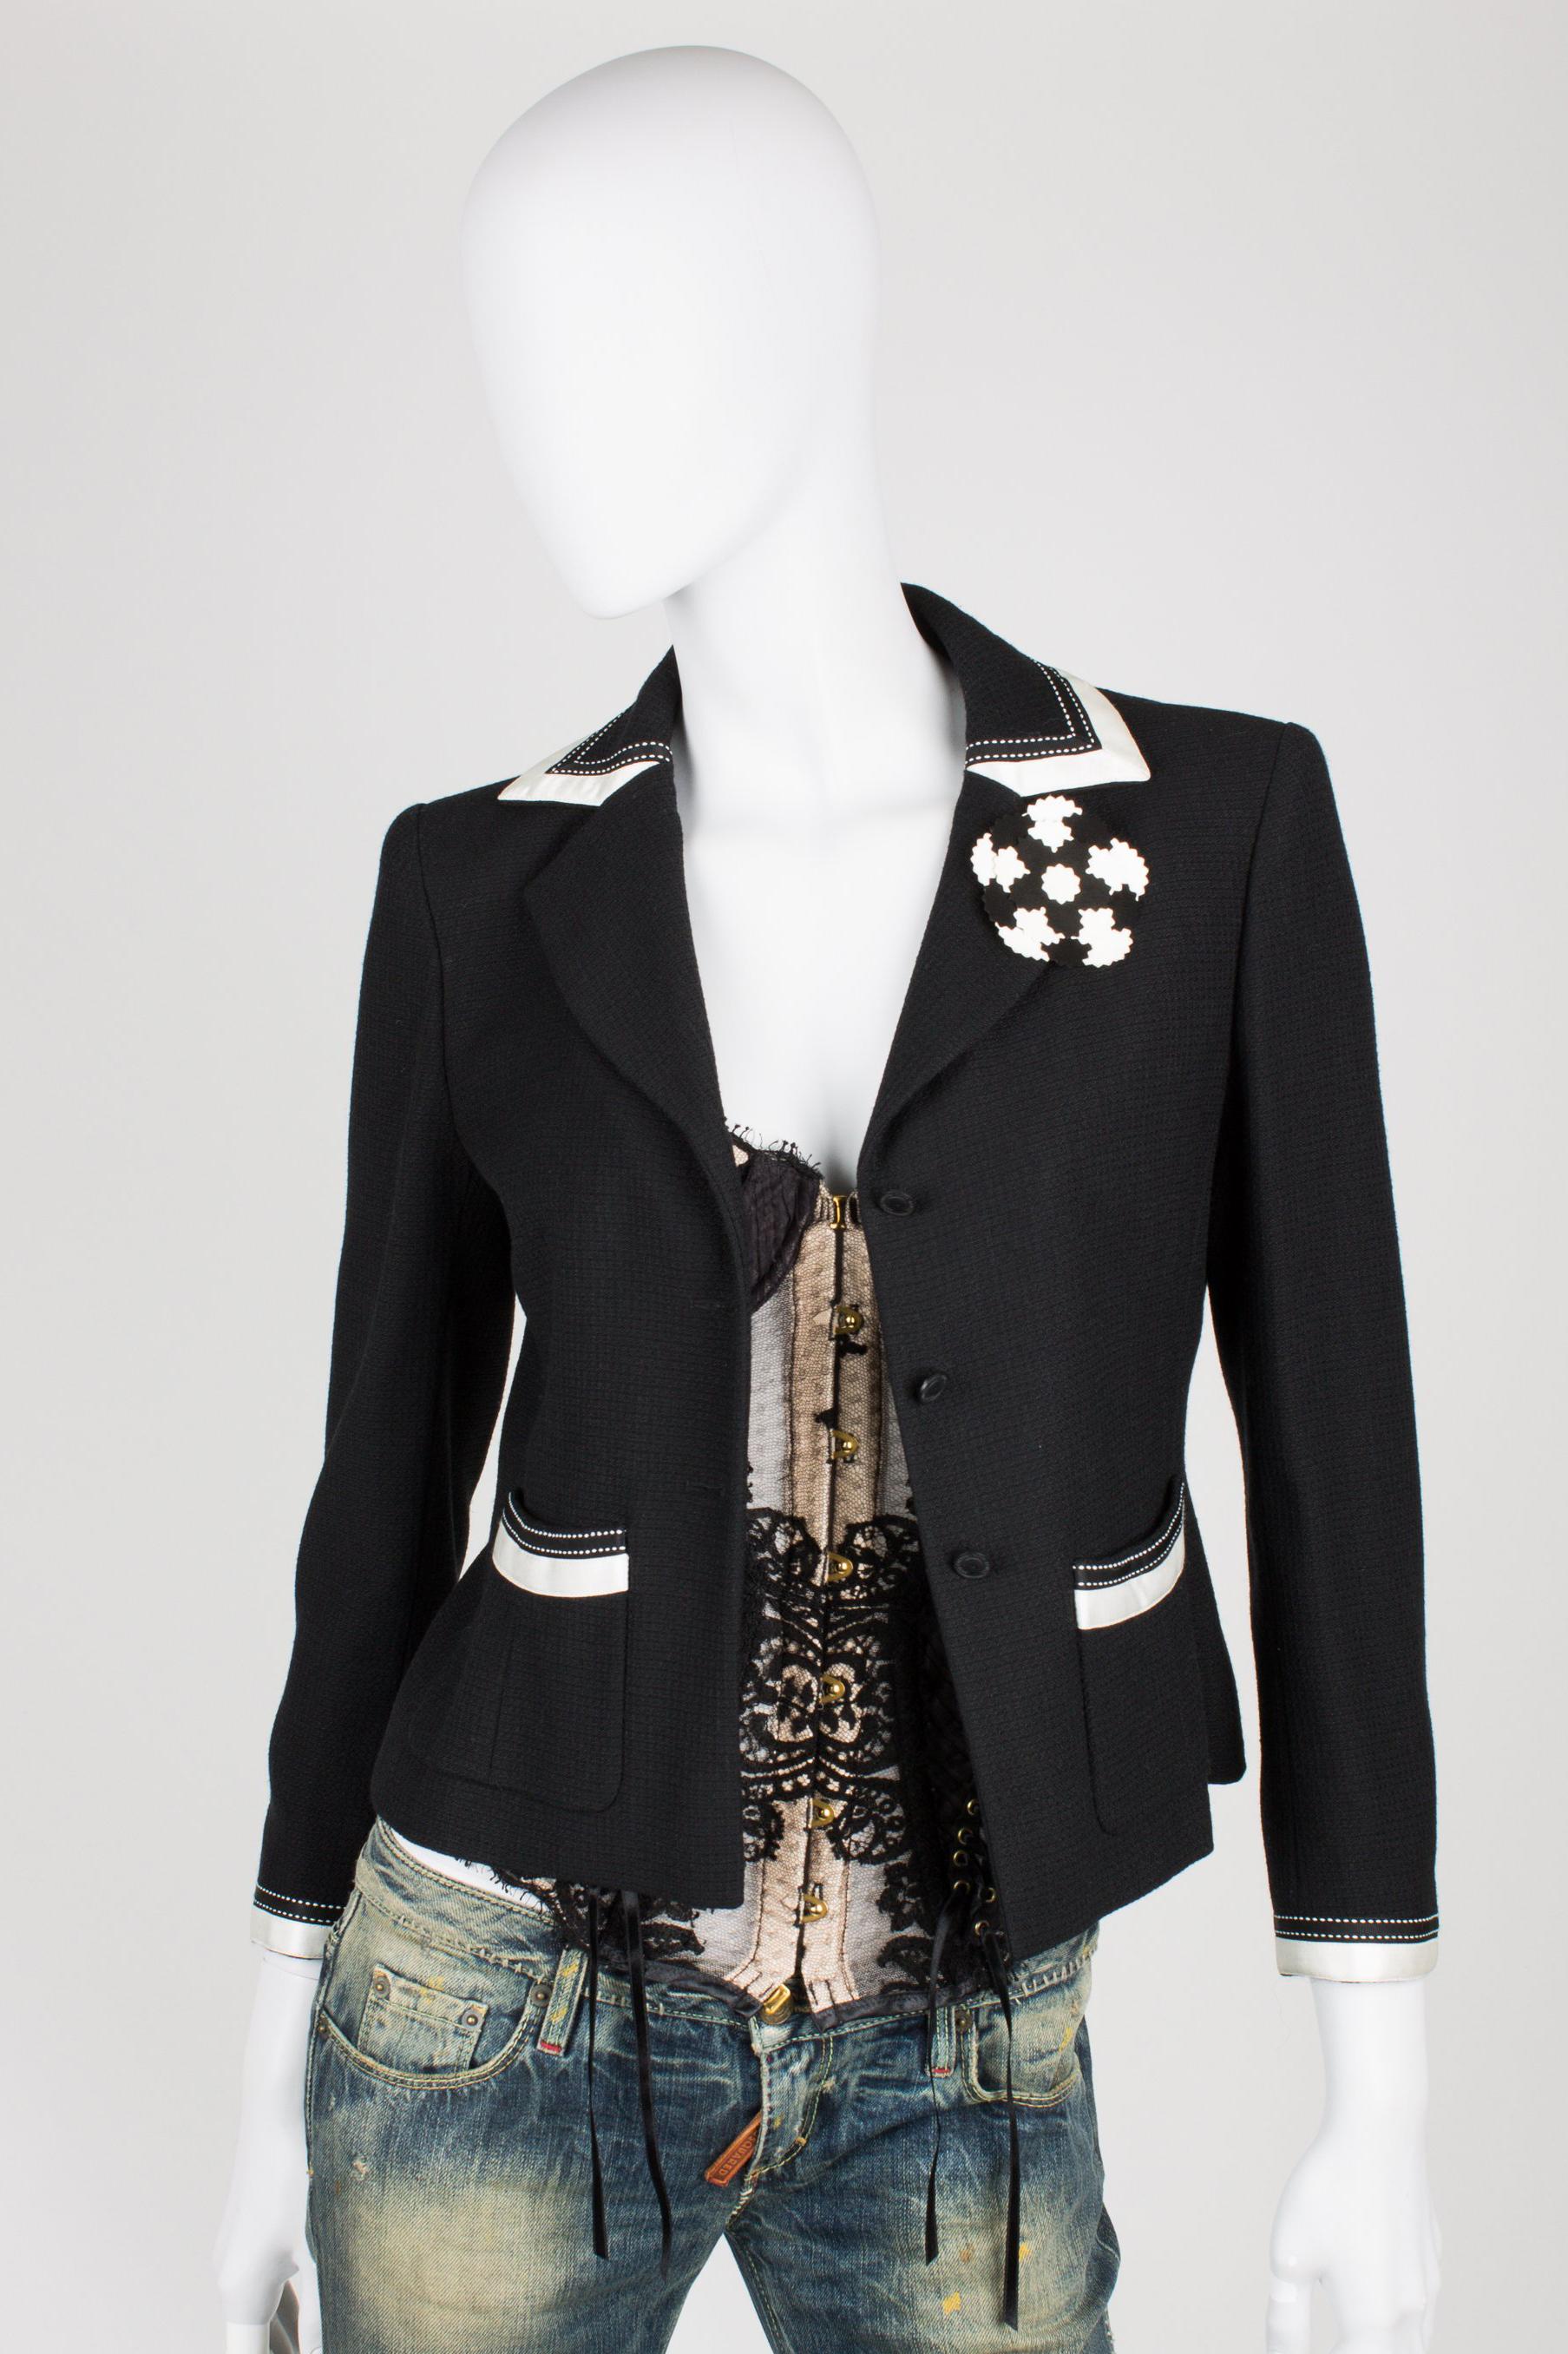 Beautiful black and white Chanel suit; a blazer and a skirt

The blazer is made of black fabric with white satin trimming. Black coin buttons at the front, three in a row. At the end of the sleeves also three of these buttons, a little bit smaller